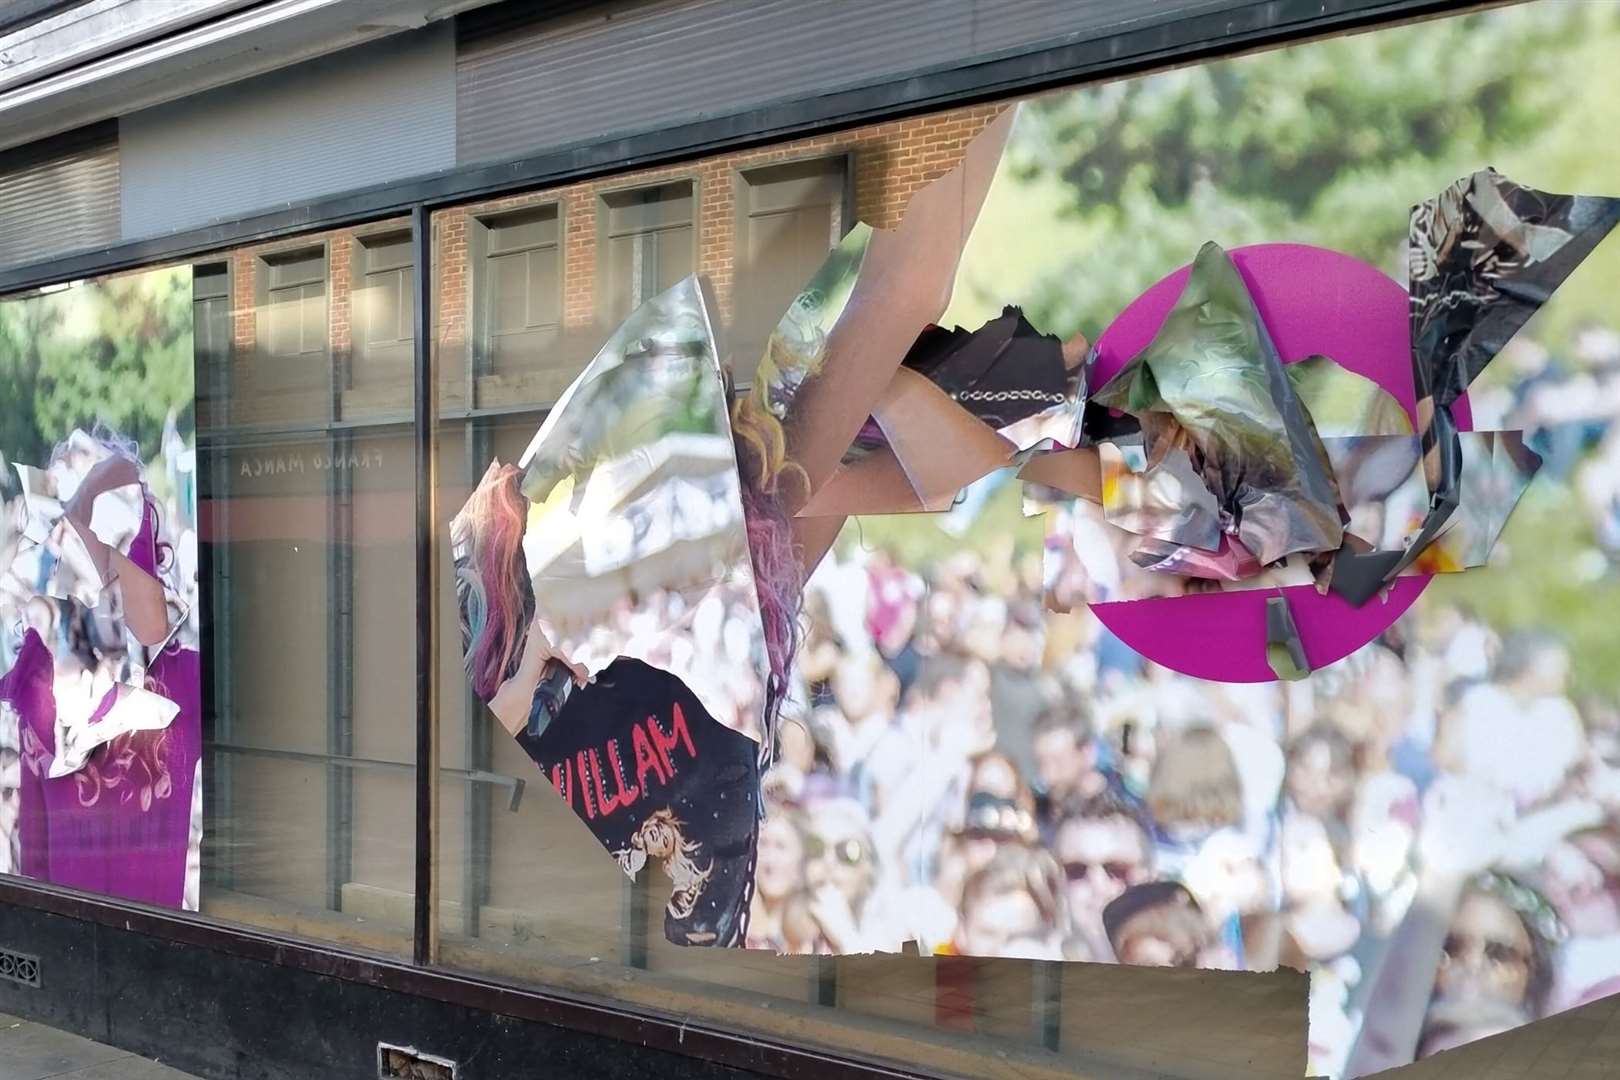 Jonathan Fitter-Harding provided pictures of the vandalised window in the former Debenhams in Canterbury city centre